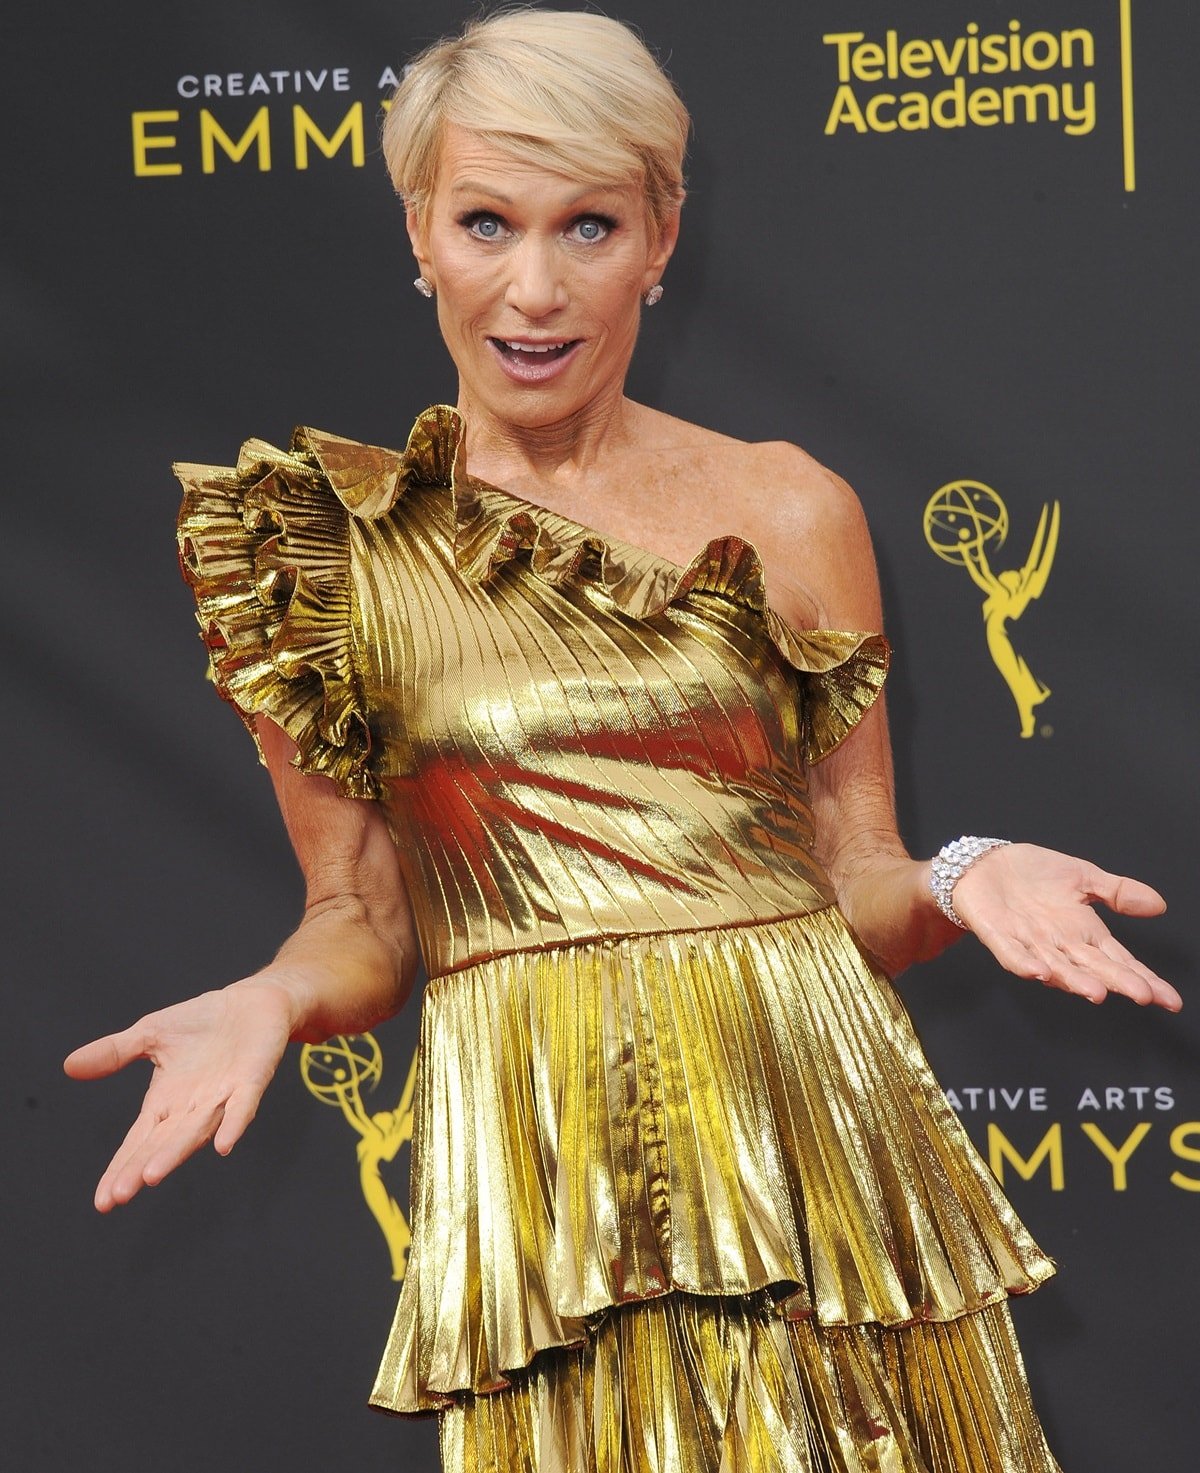 One of the original "Shark" investors on ABC's Shark Tank, Barbara Corcoran is an American businesswoman, investor, consultant, author, and television personality who has a net worth of $100 million